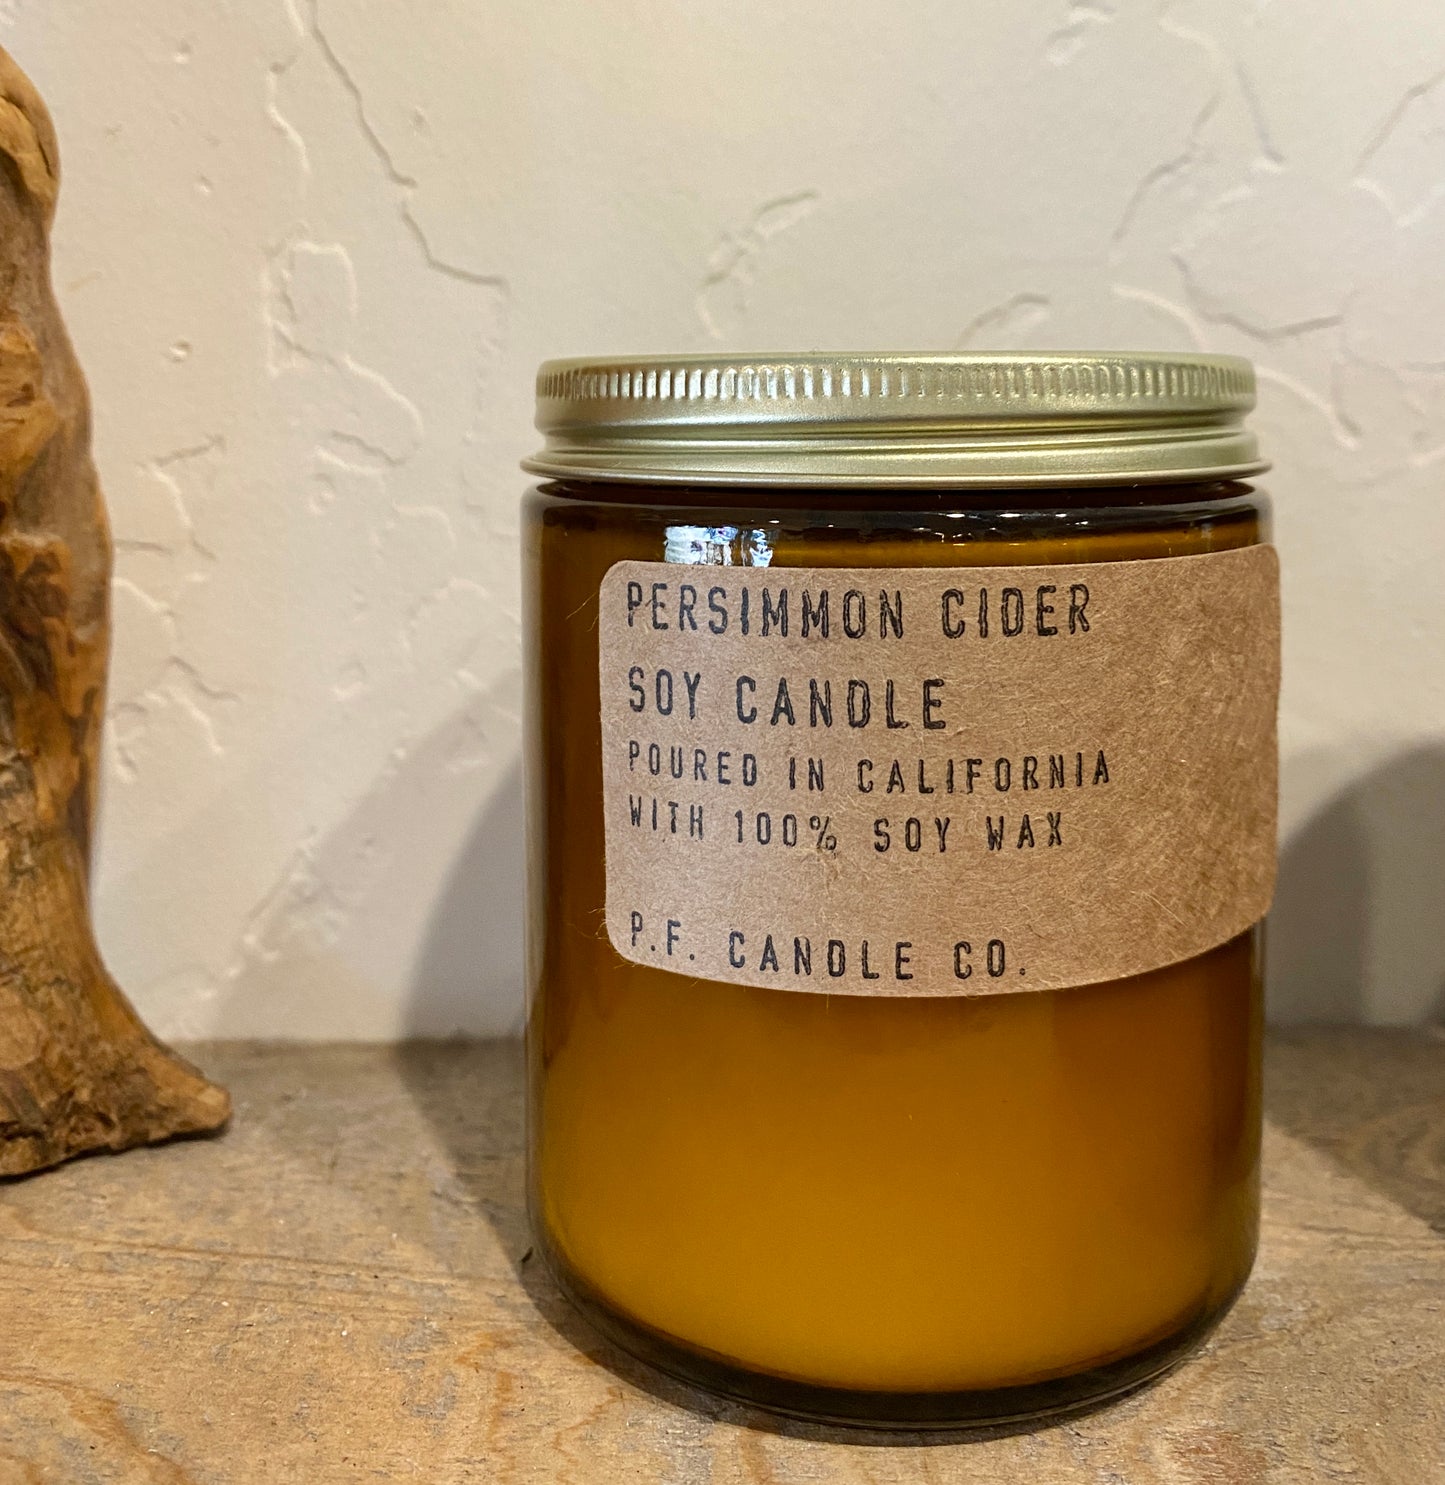 PF Candle Persimmon Cider Candle 7.2 oz